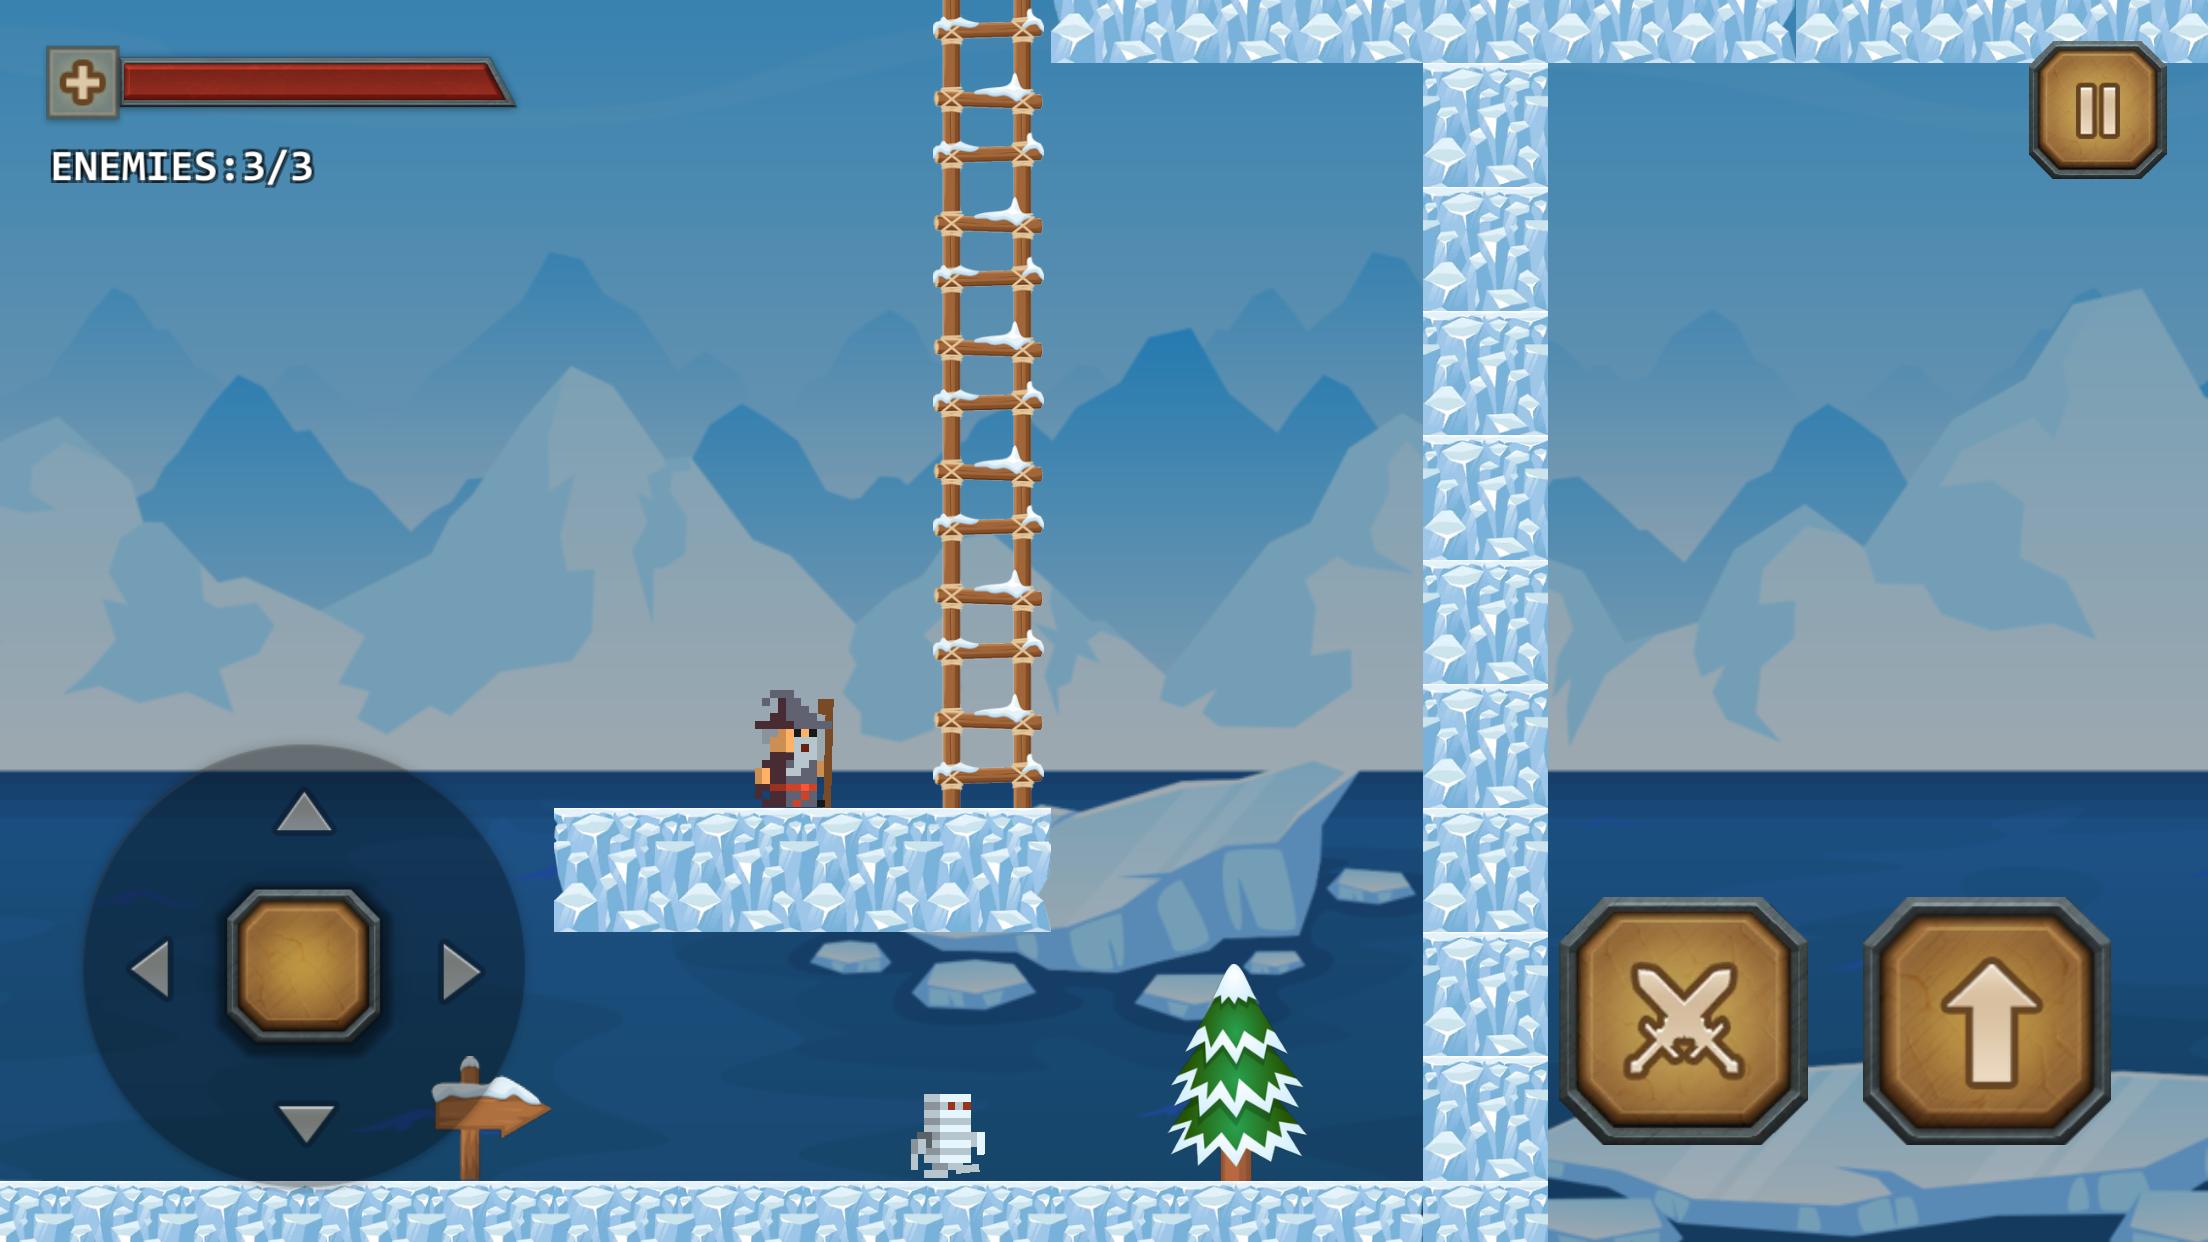 Epic Game Maker Create and Share Your Levels 1.9 Screenshot 3